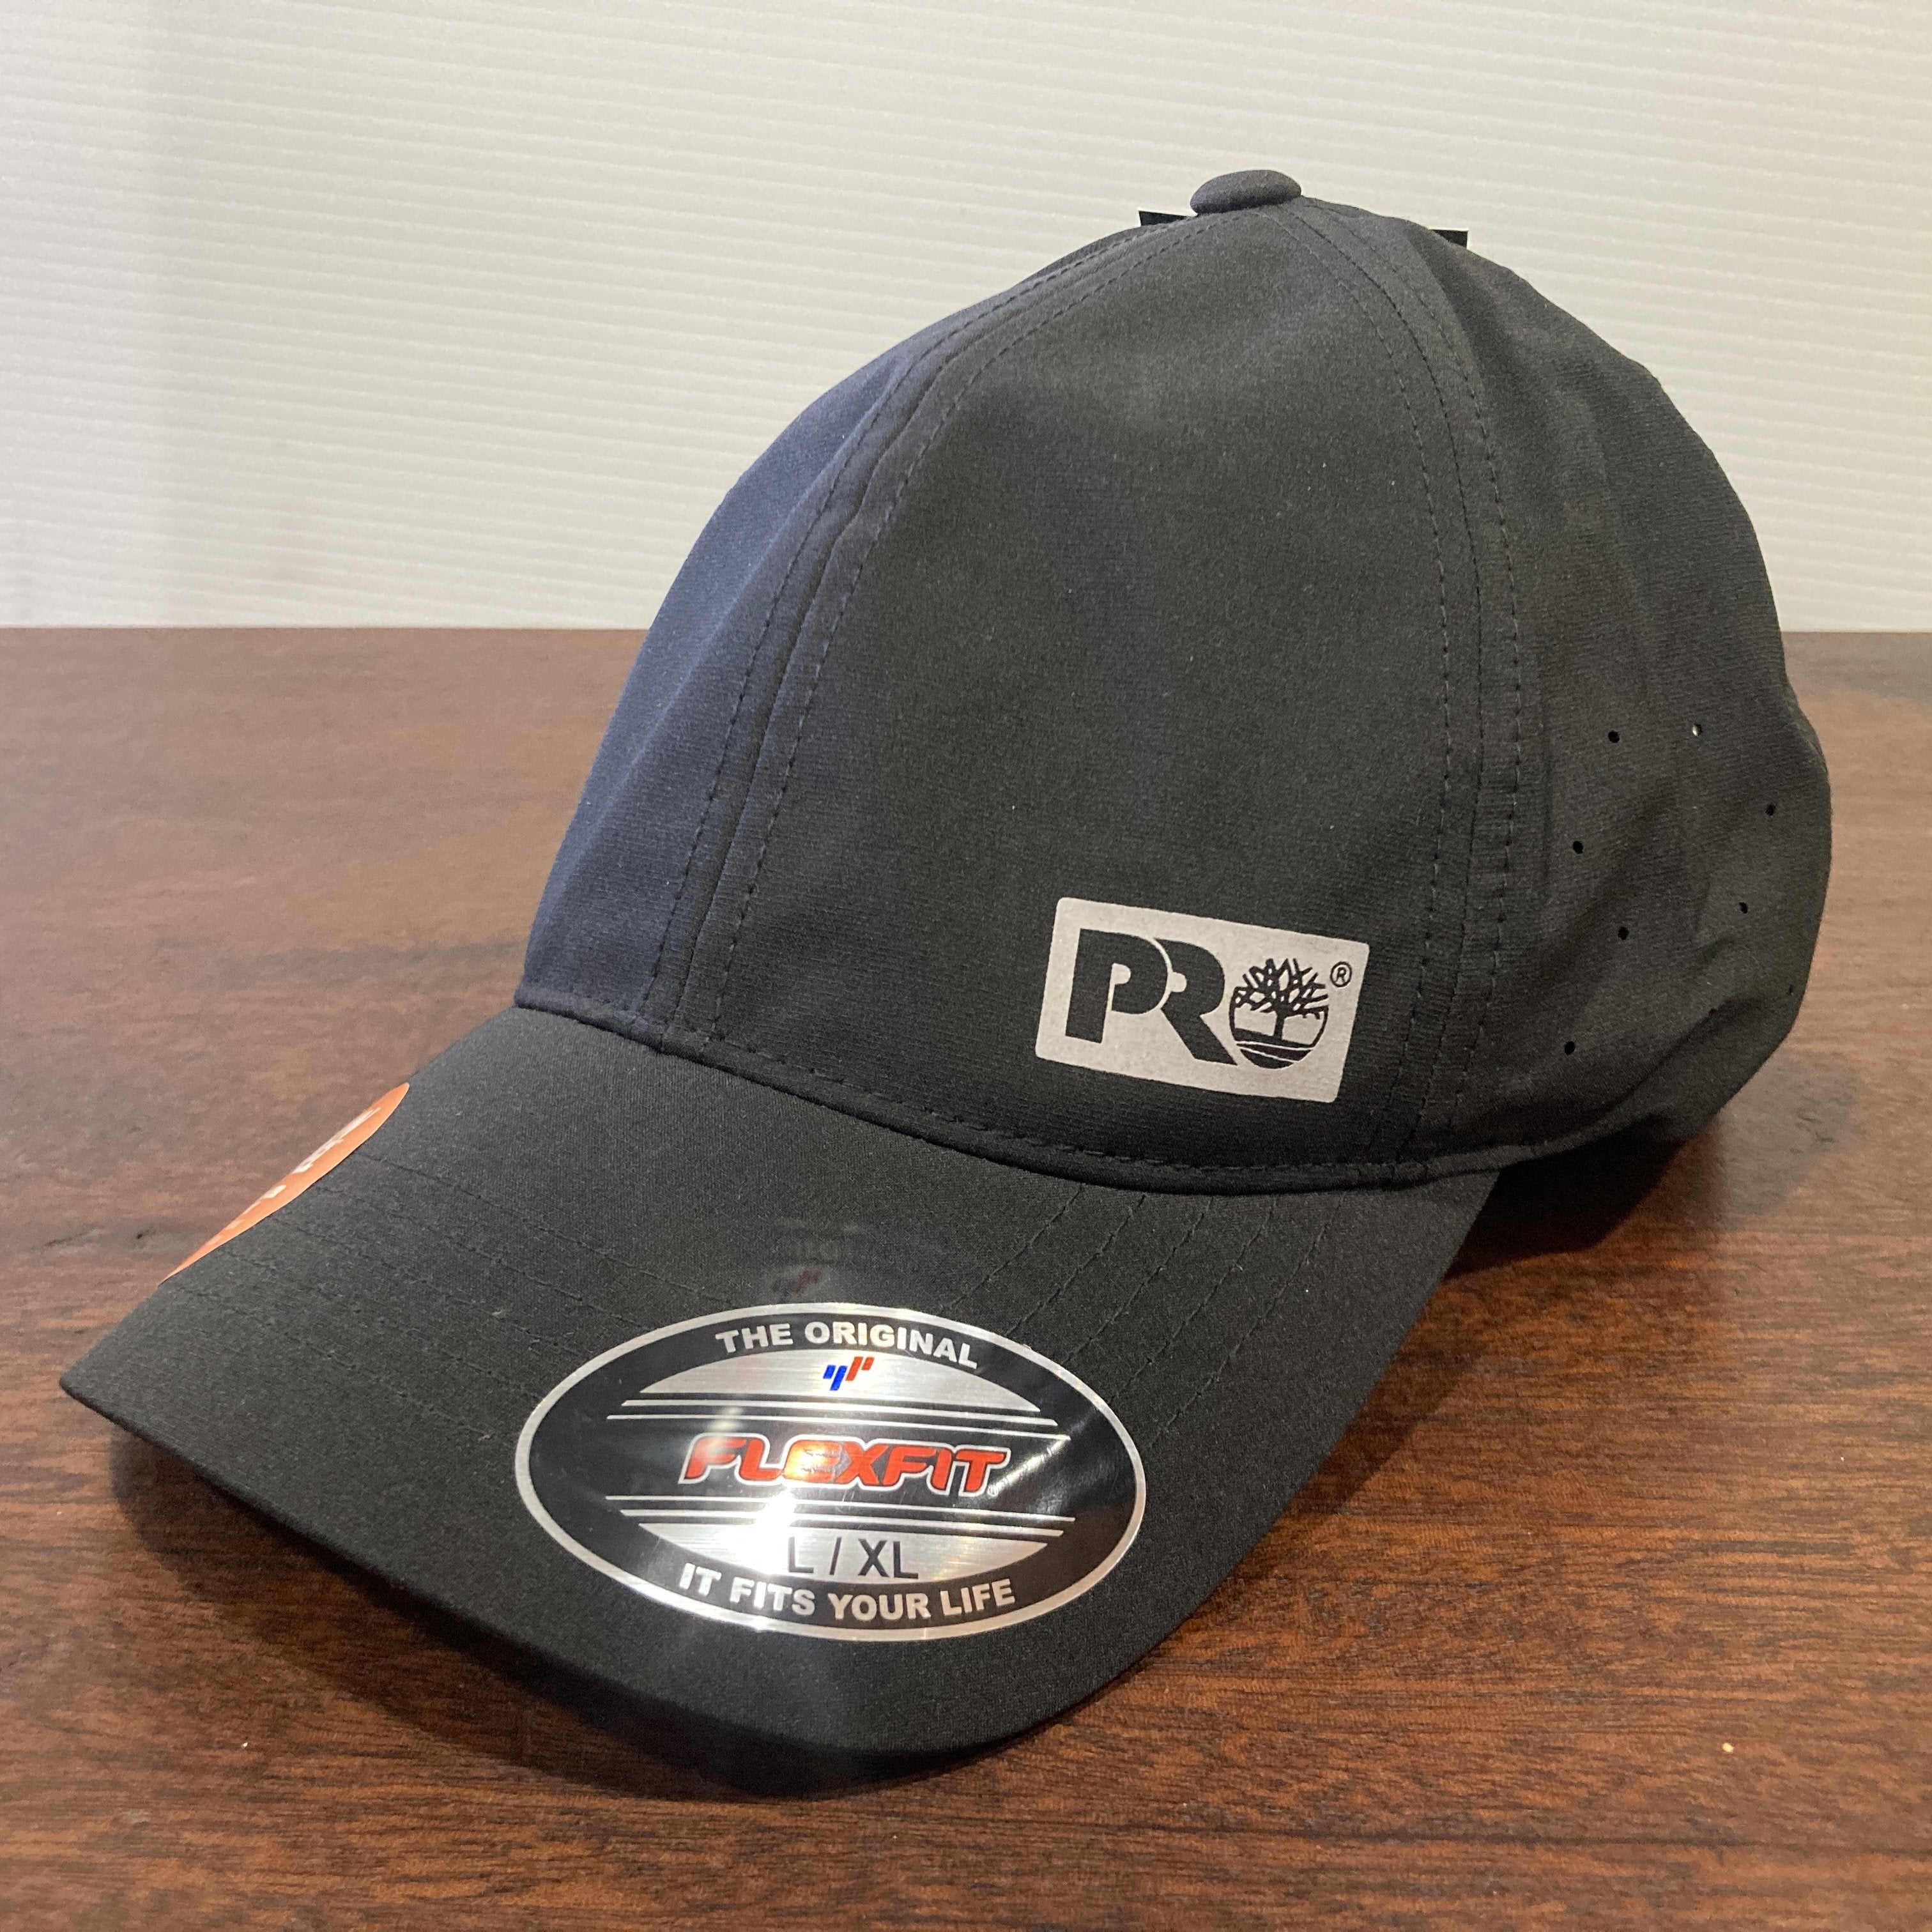 Timberland Pro Performance Hat – Outfitters Ltd. Rose North Wind